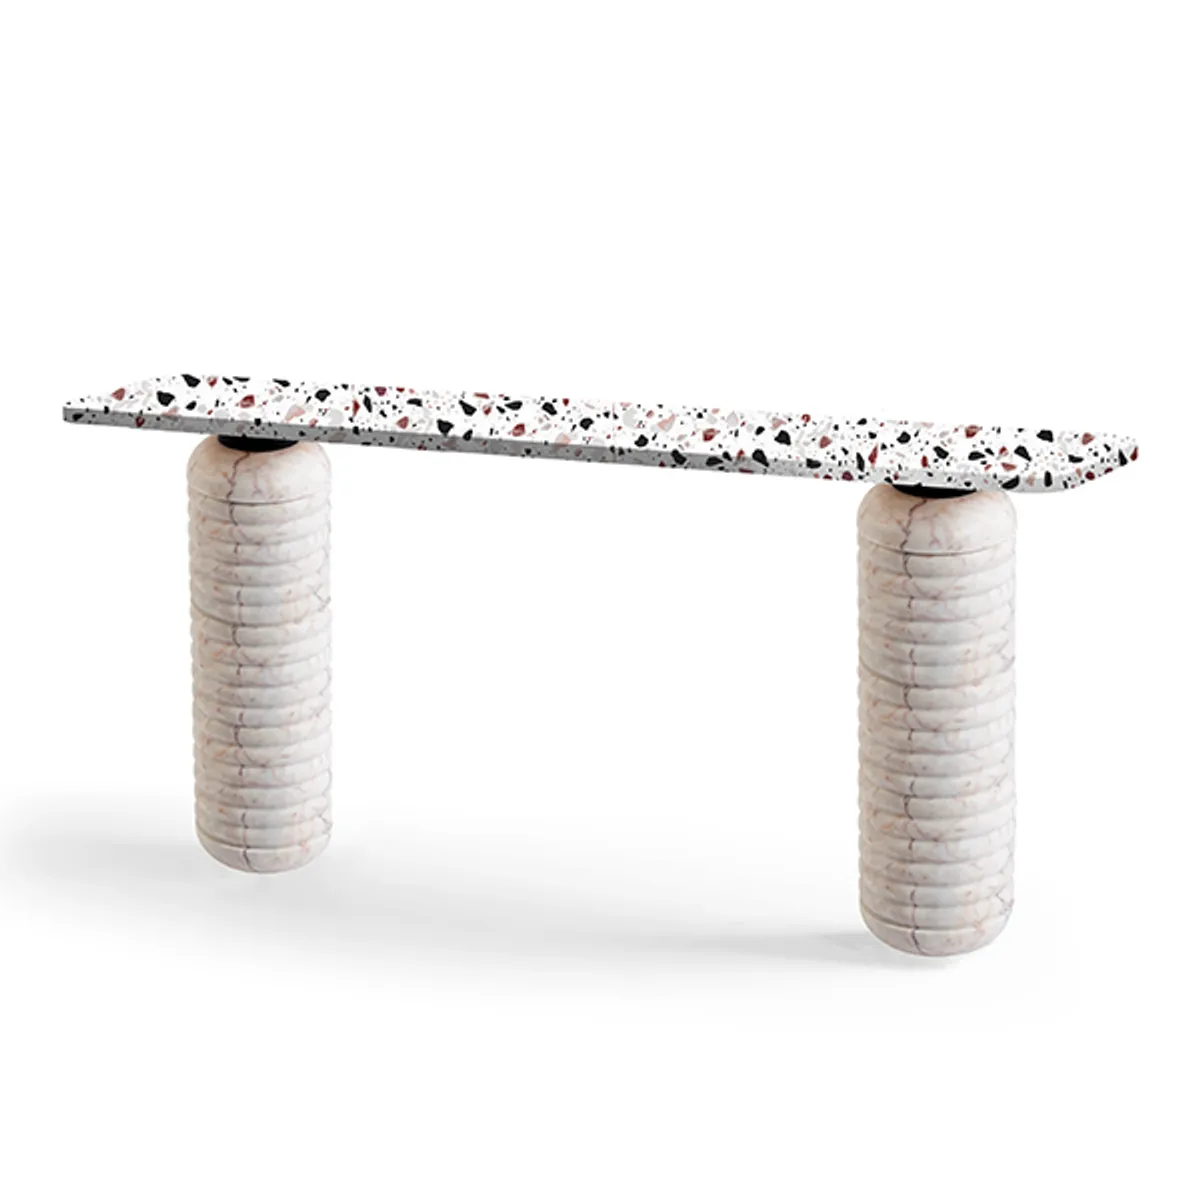 Zeus Console Table Marble And Terrazzo By Insideoutcontracts